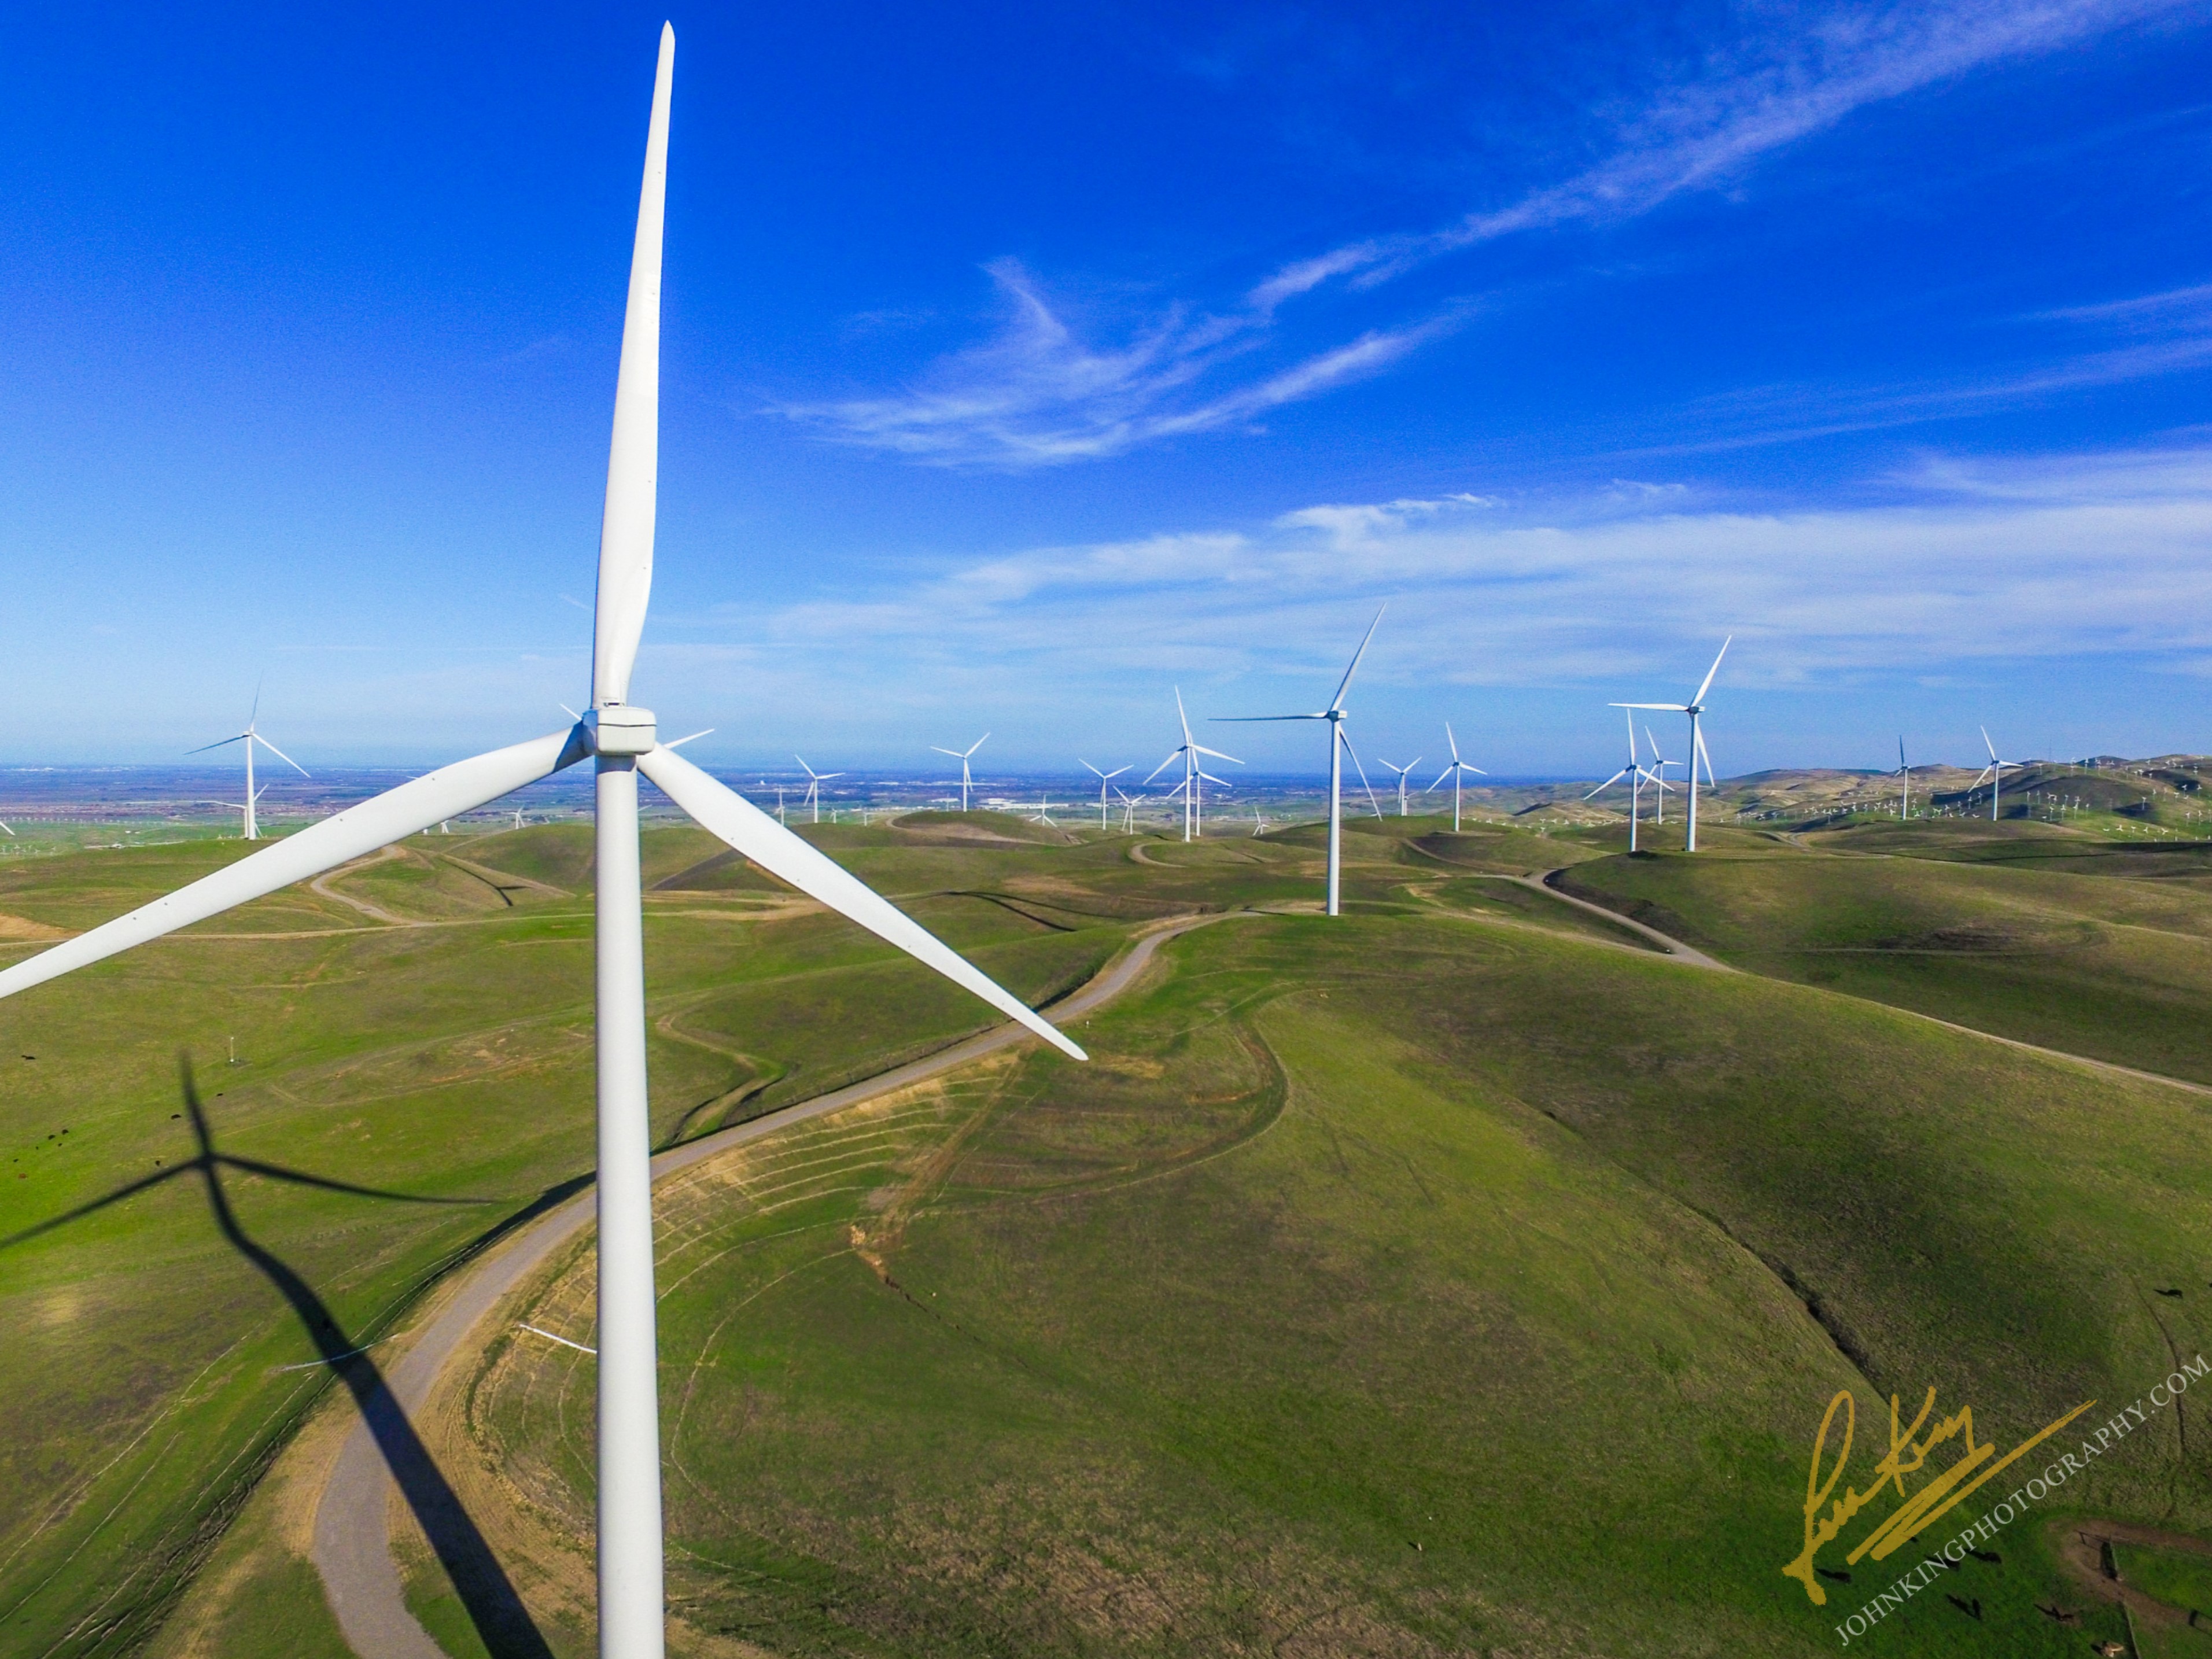 Altamont Pass Windfarm, on the eastern edge of the San Francisco Bay Area